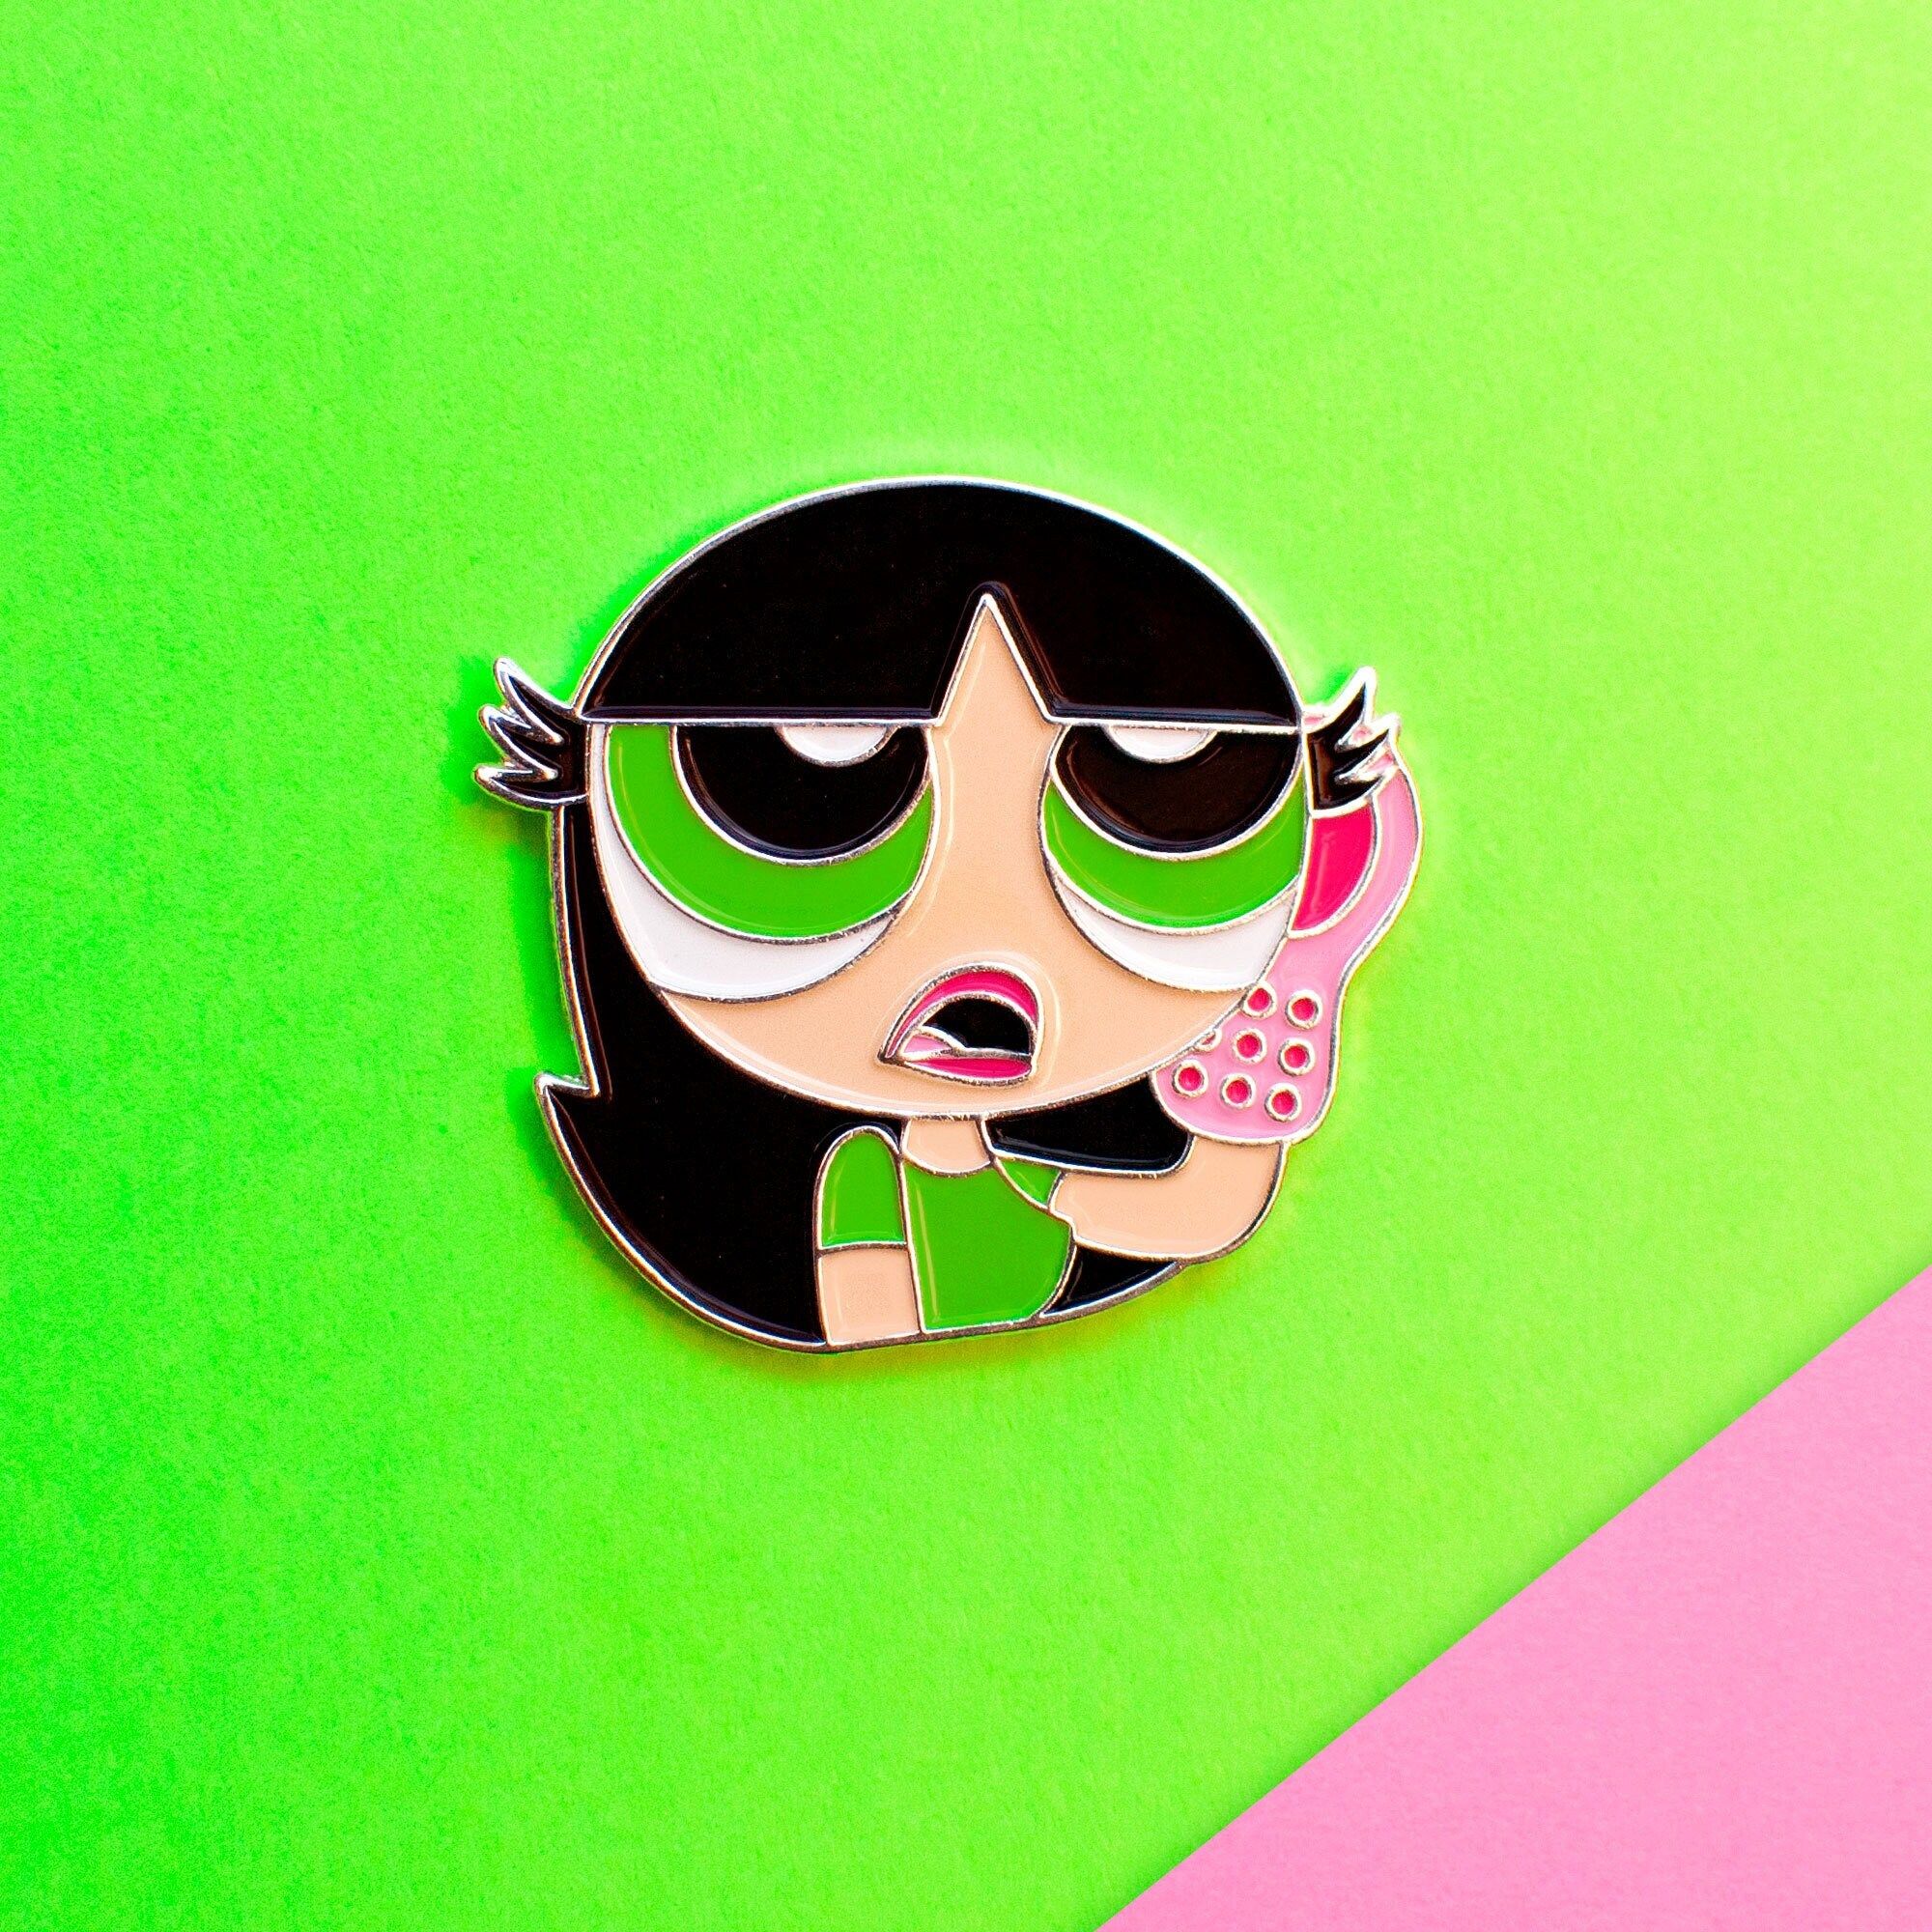 A pin that has an image of the powerpuff girls - Buttercup